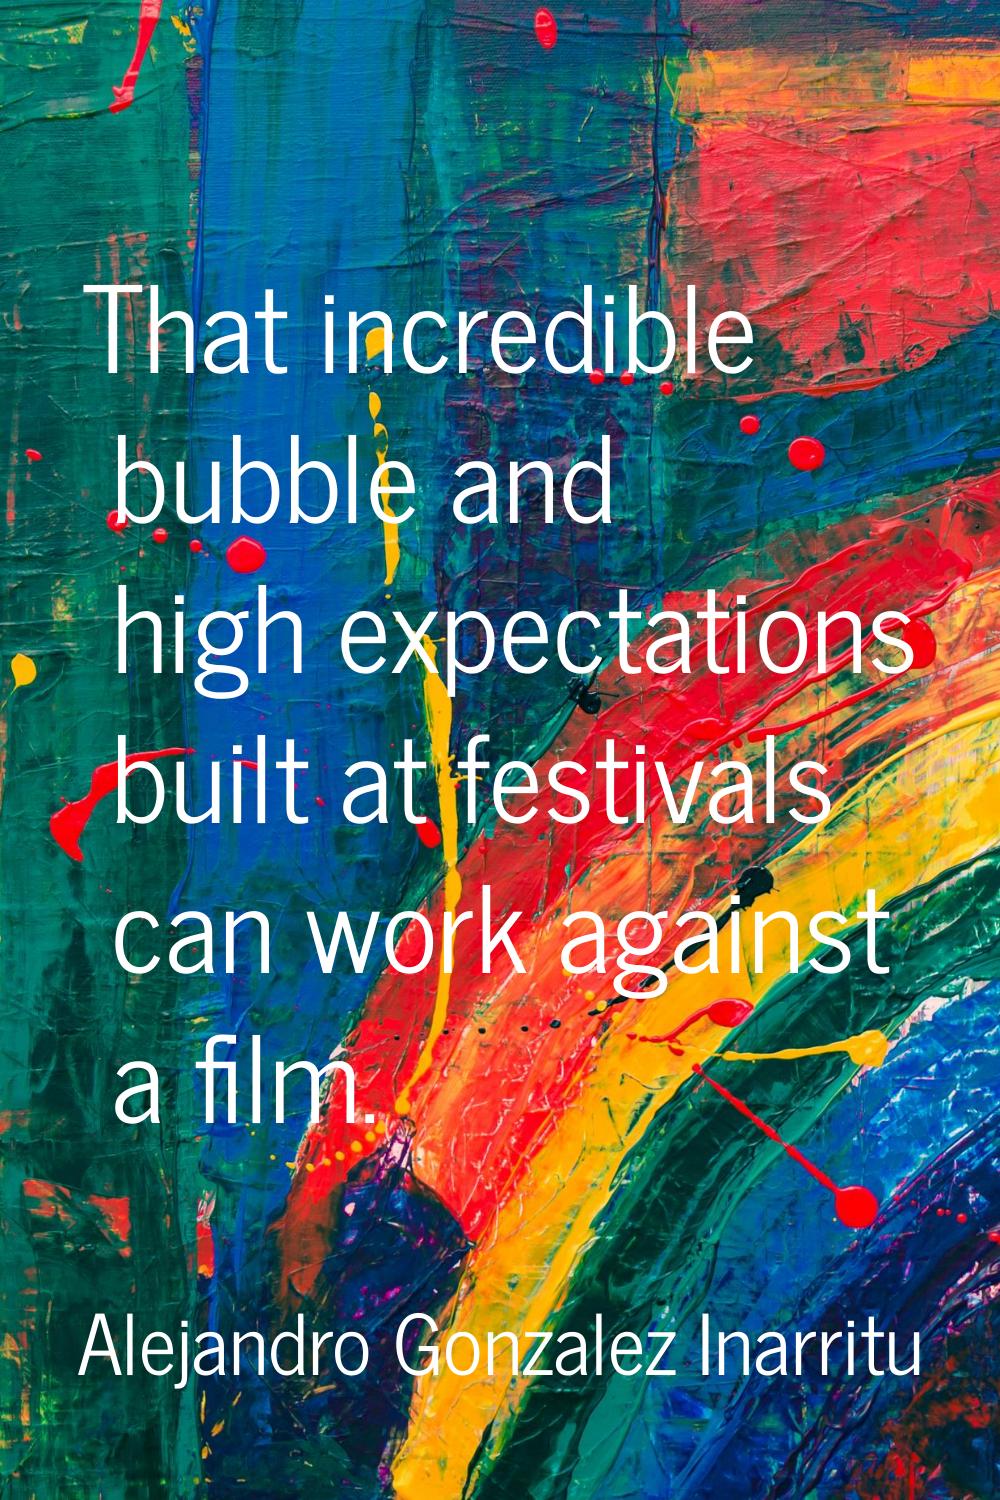 That incredible bubble and high expectations built at festivals can work against a film.